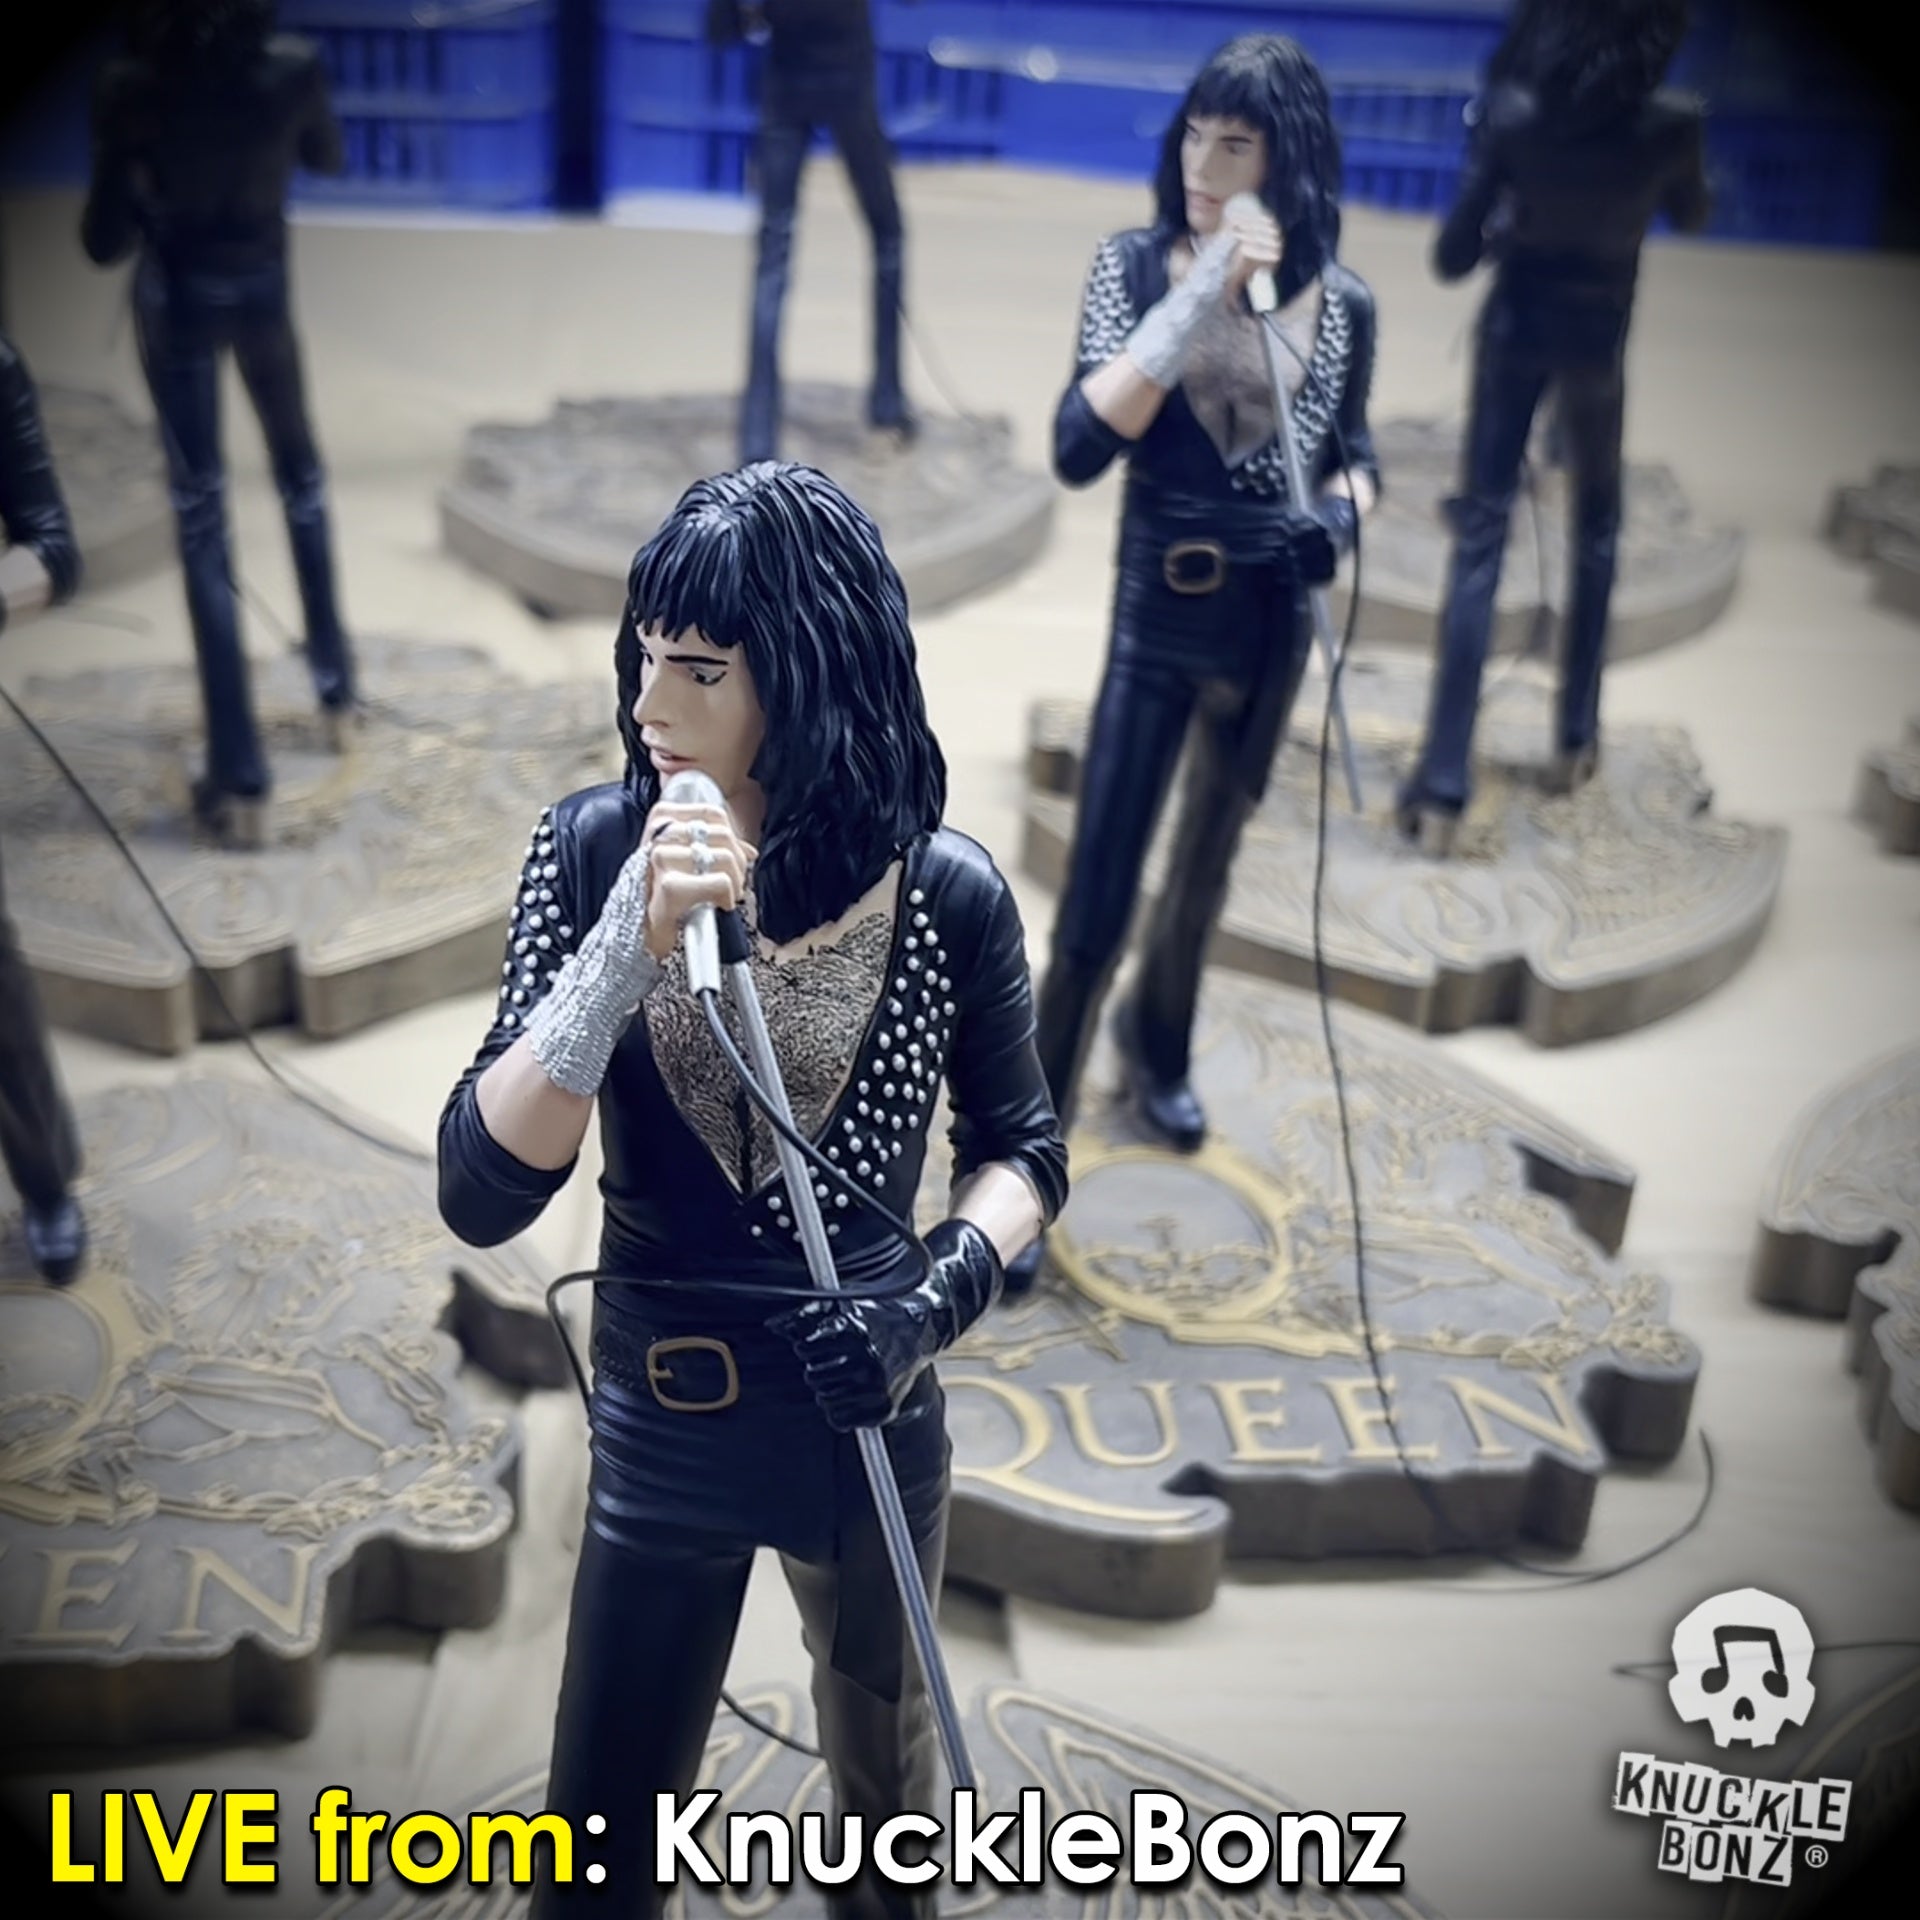 KnuckleBonz - QUEEN II Ltd. Edition Statue Production WRAPPED!